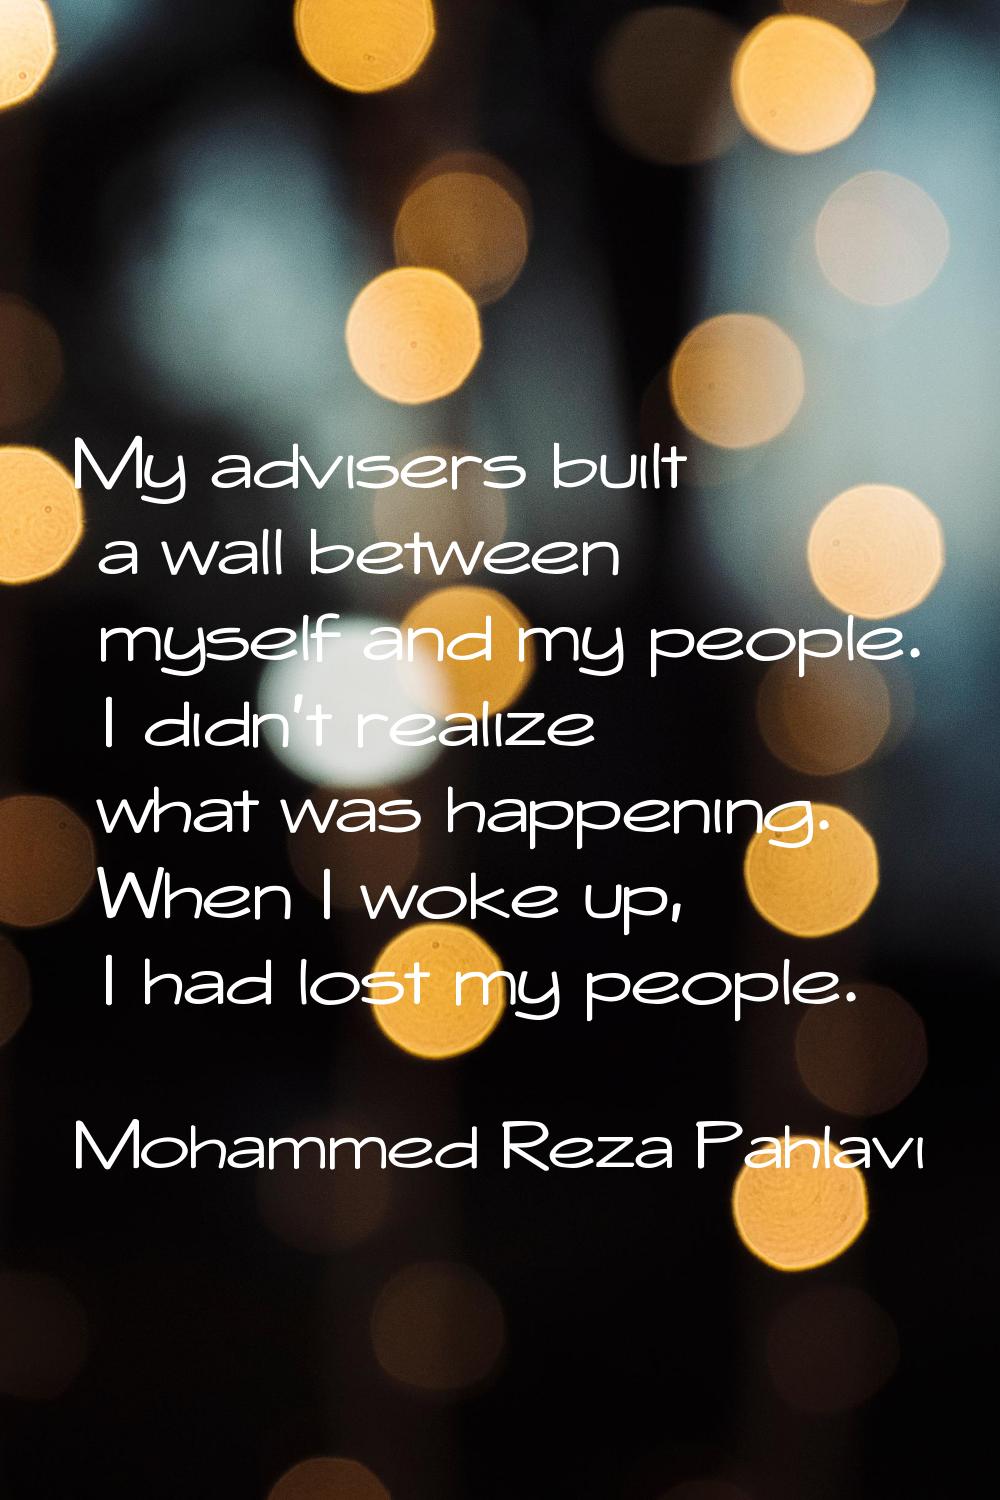 My advisers built a wall between myself and my people. I didn't realize what was happening. When I 